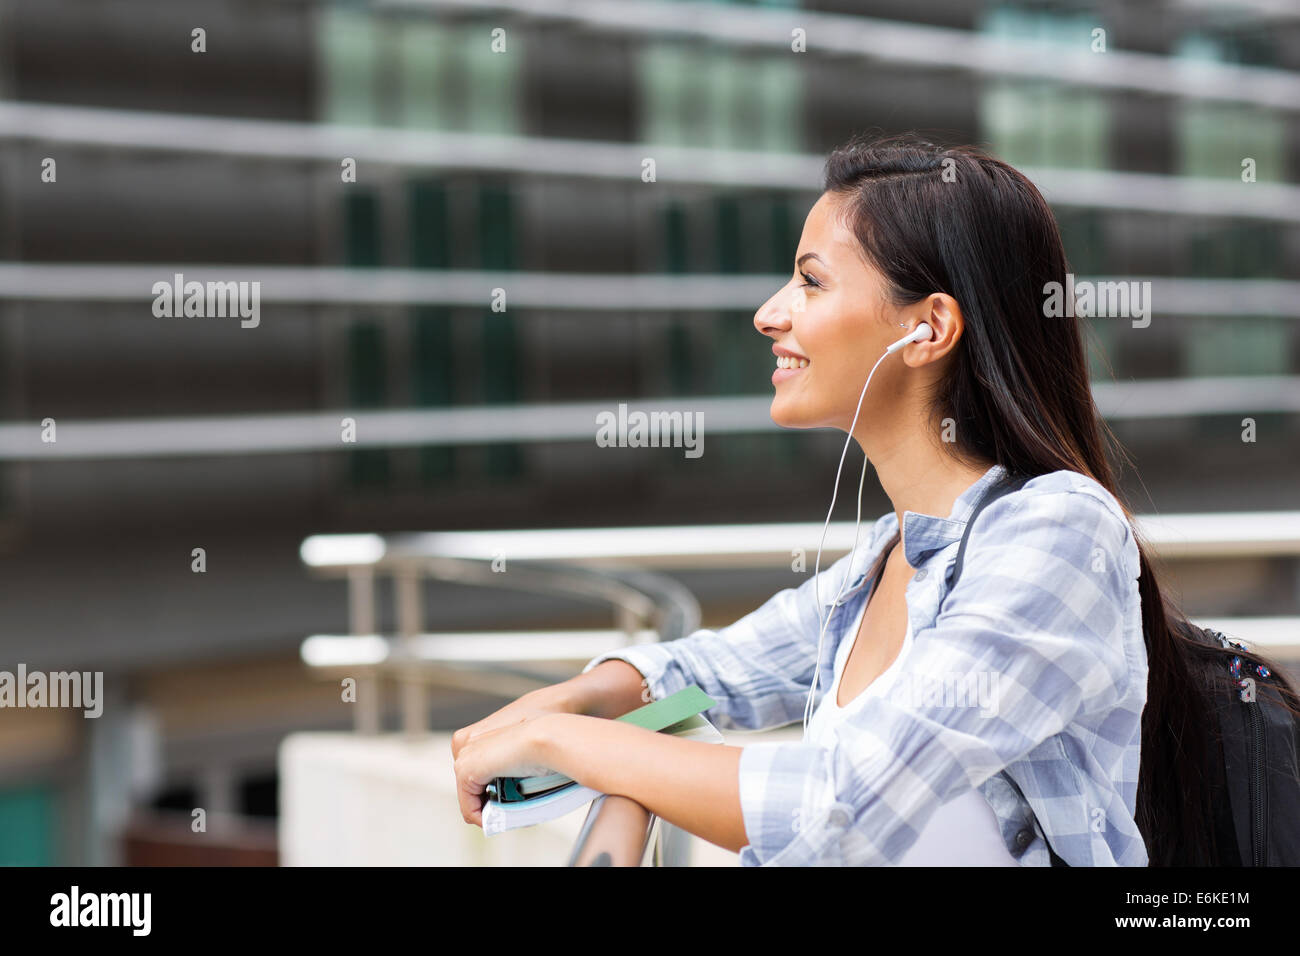 side view of happy female college student looking up Stock Photo